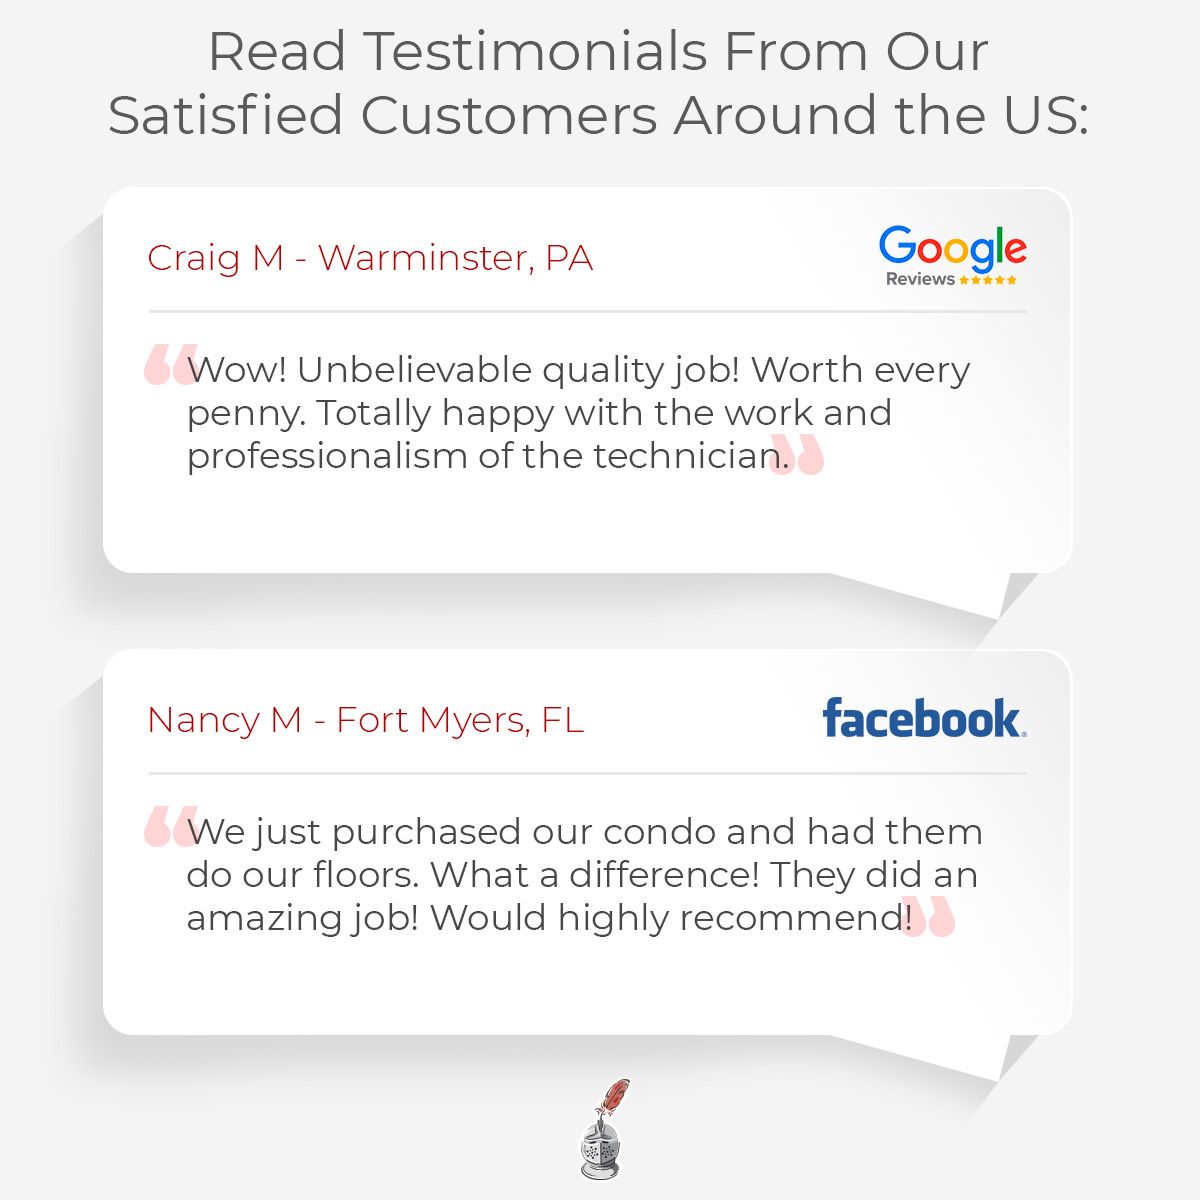 Read Testimonials From Our Satisfied Customers Around the US